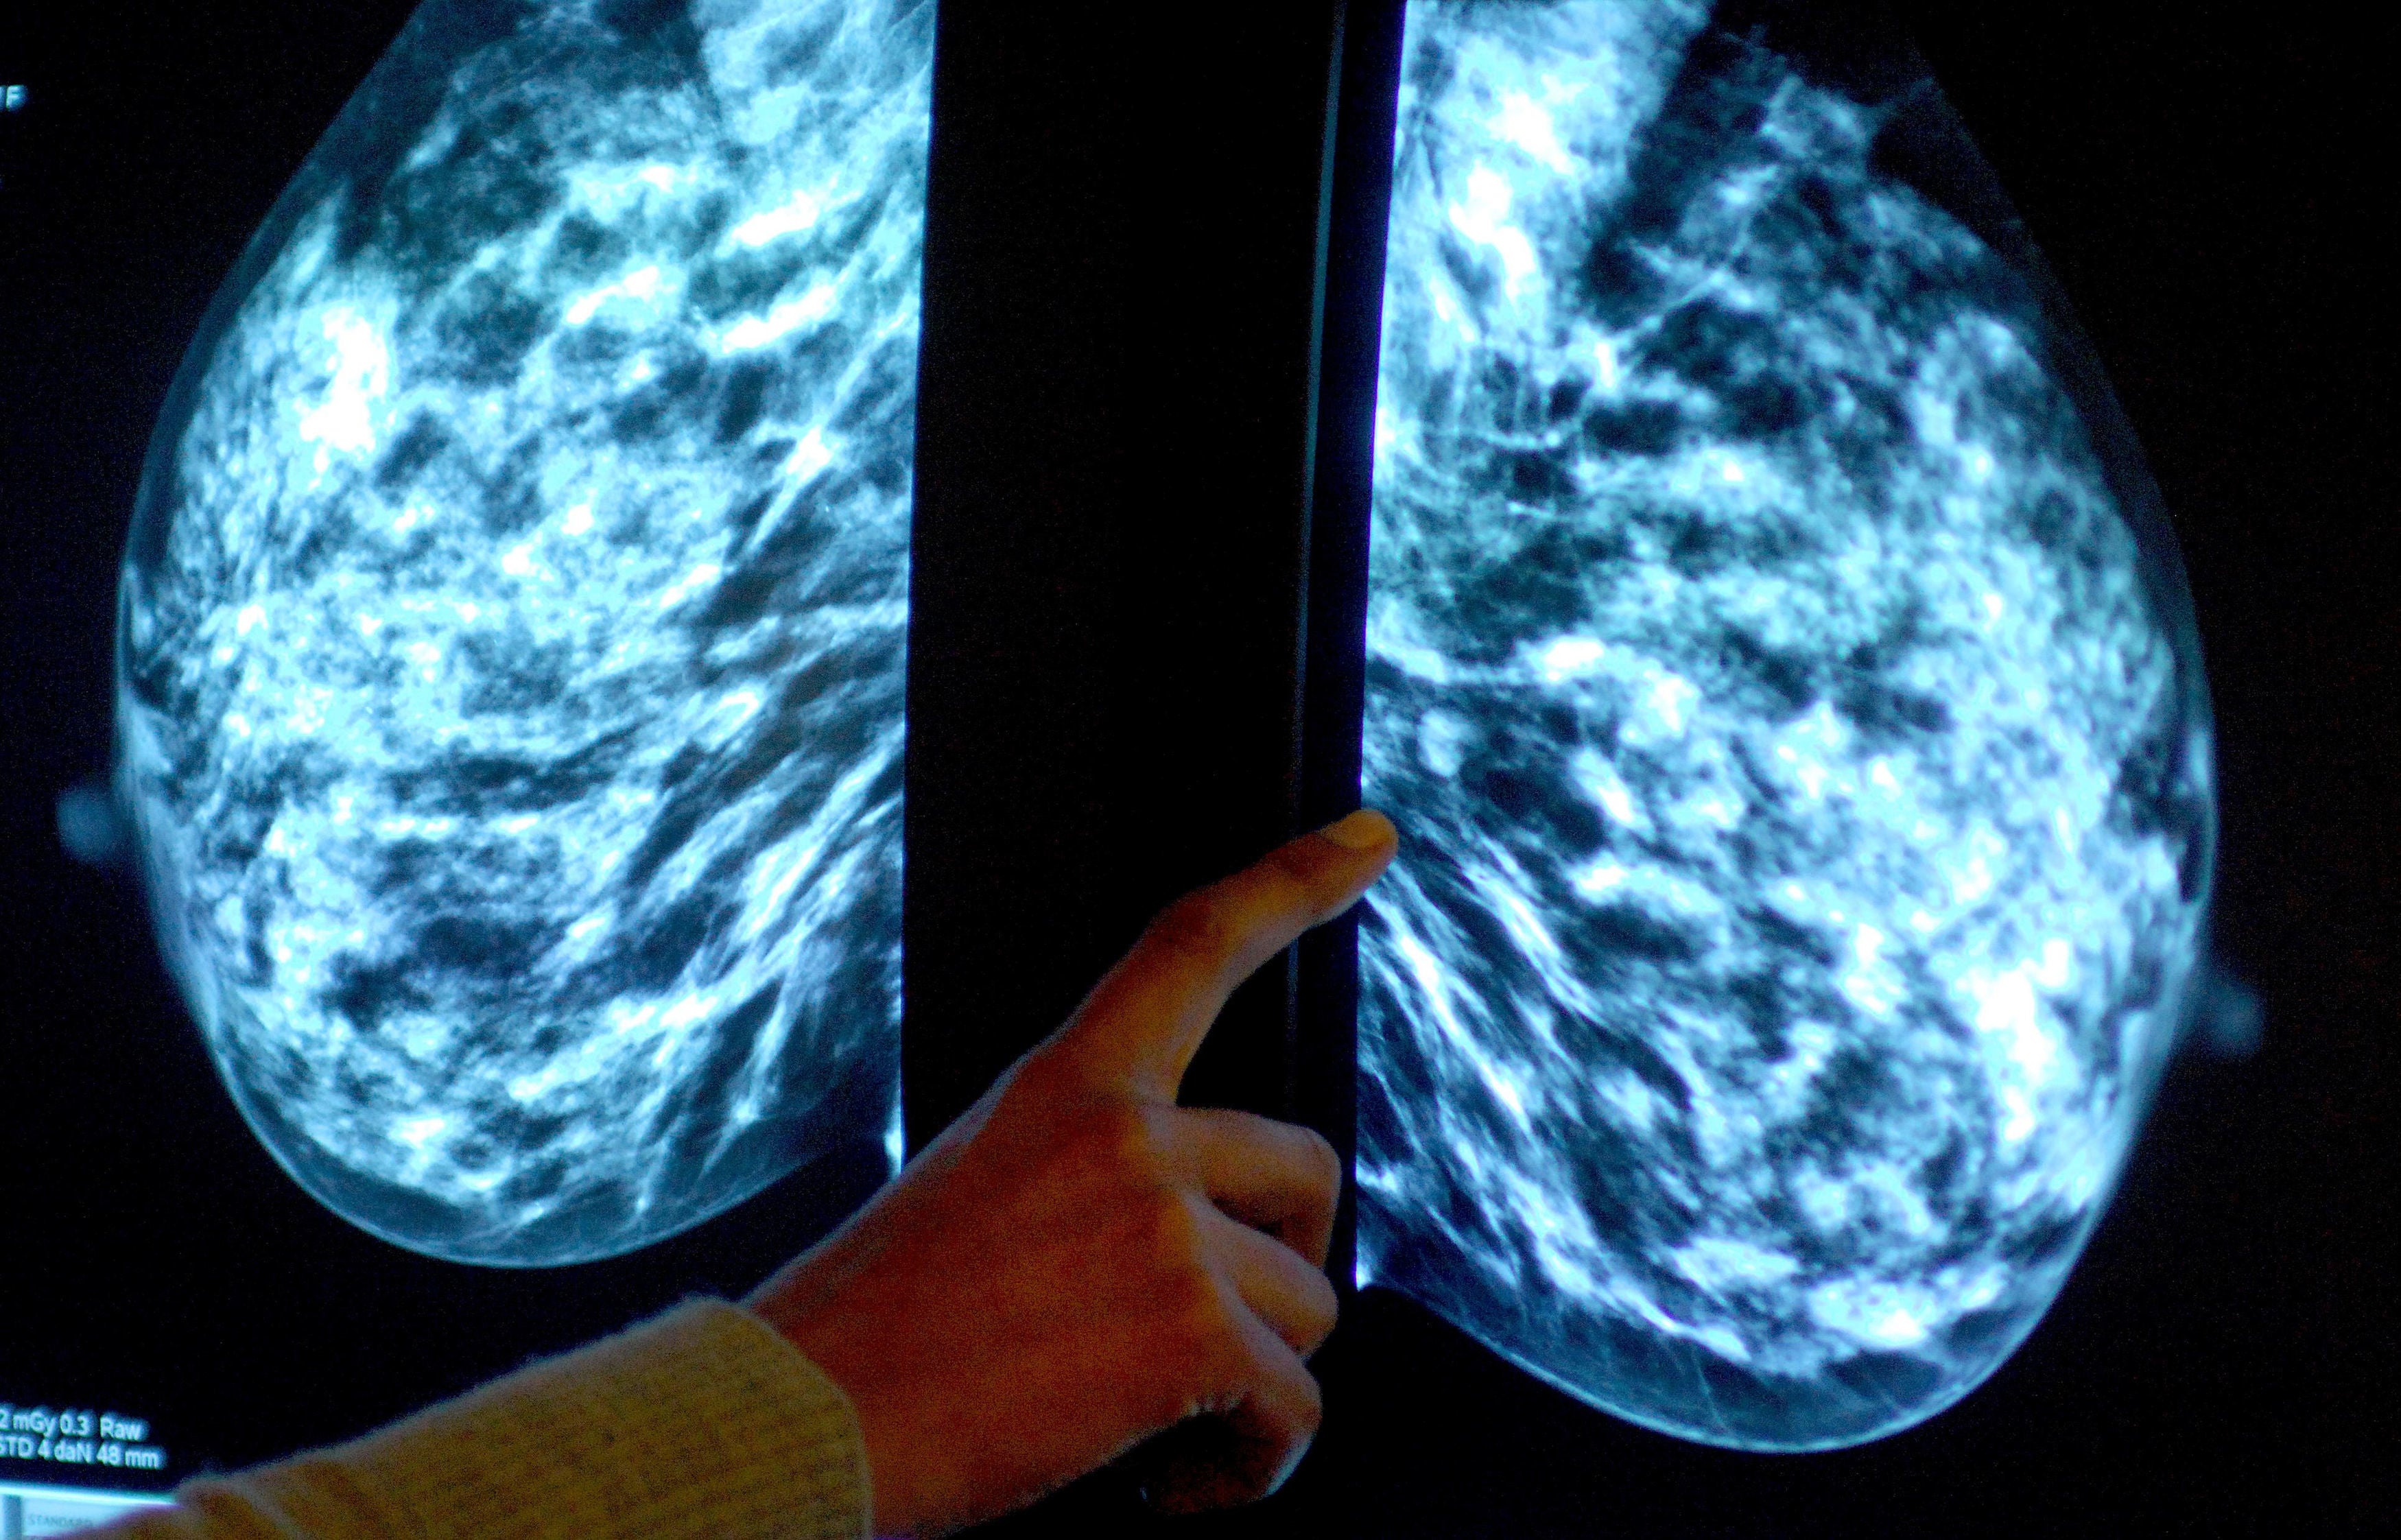 AI can read breast cancer screening images, study finds | The Independent